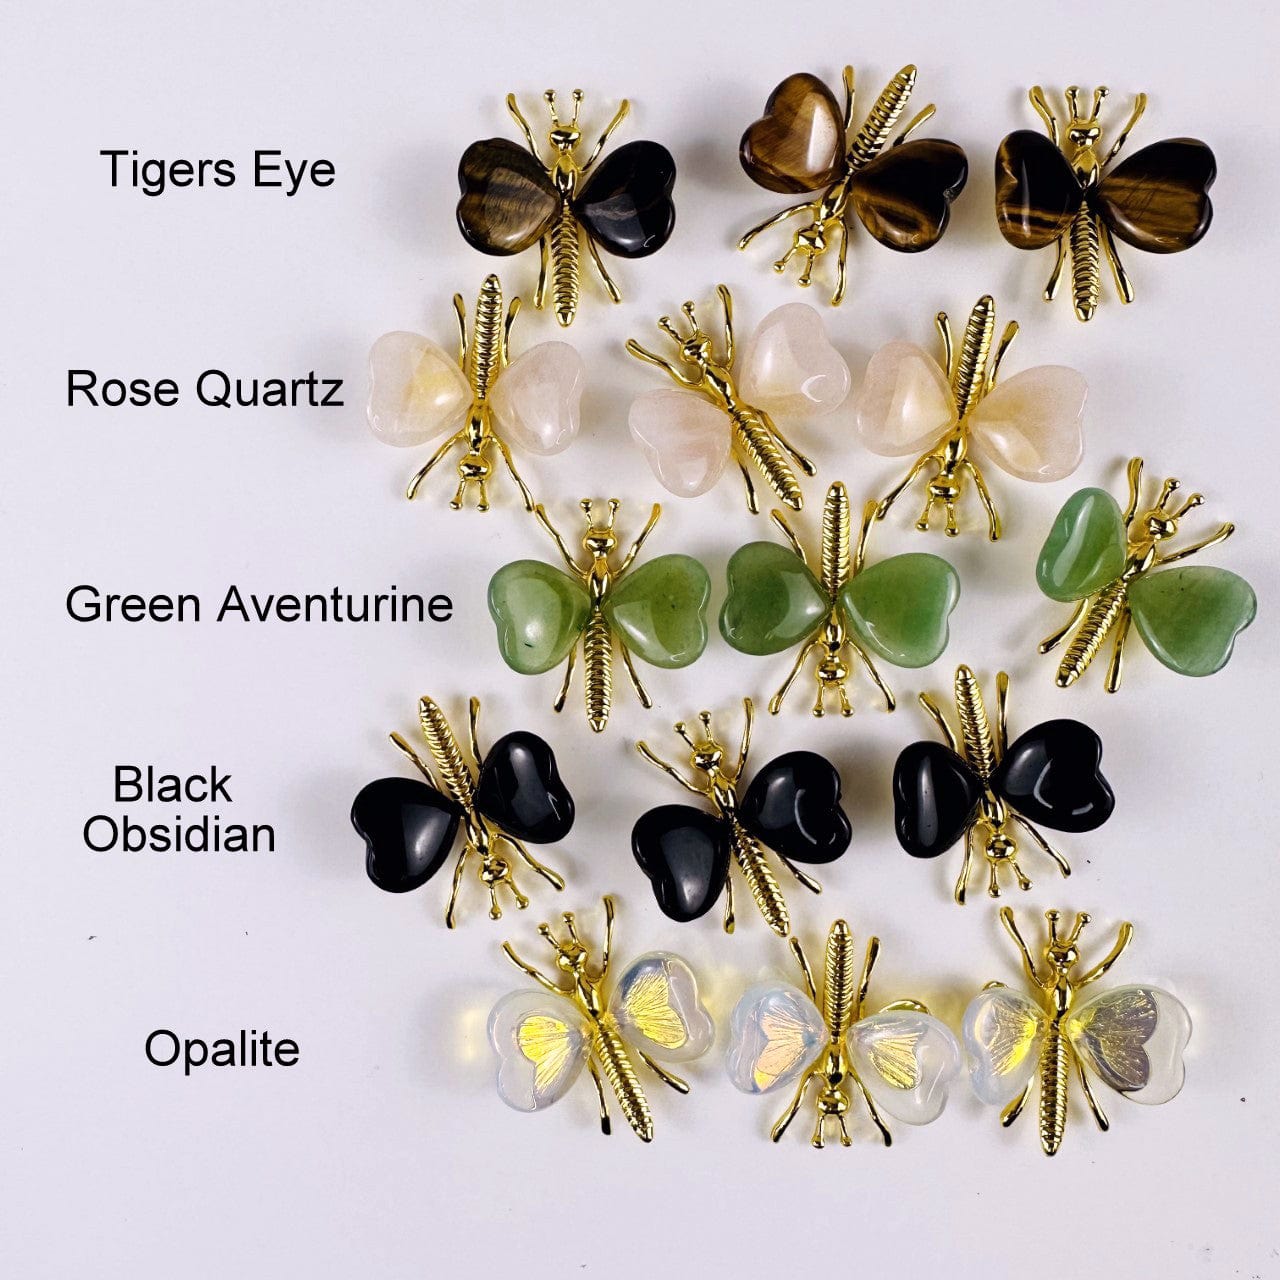 Gemstone Butterflies with Gold Tone Body on a table showing the assorted stones we carry and the stone name next to it